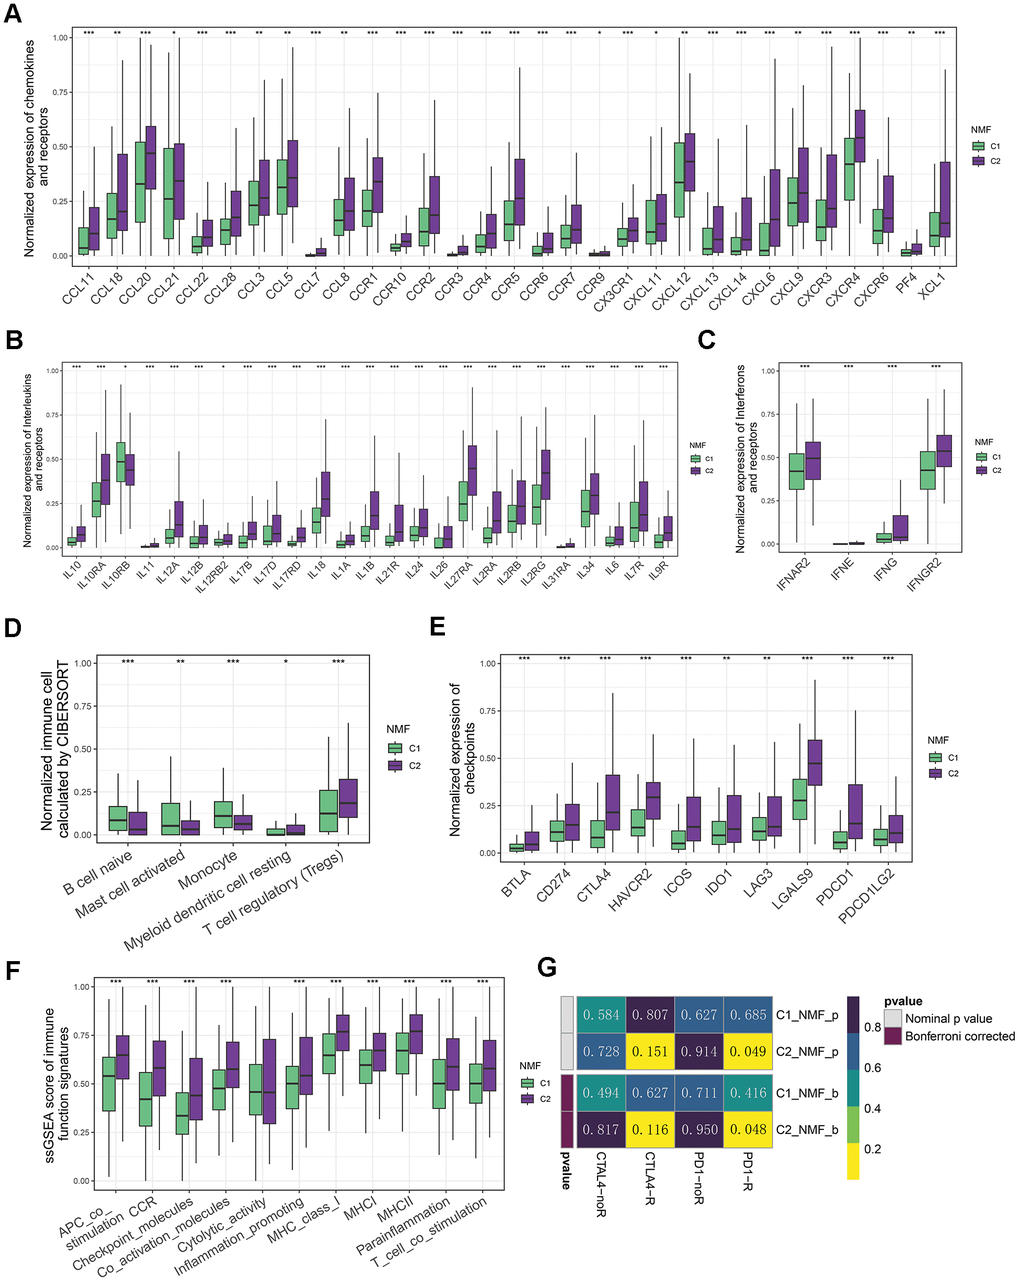 Immune landscapes of two groups. (A) Comparative box plots illustrating normalized expression levels of chemokines and receptors in two groups. (B) Comparative box plots showcasing normalized expression levels of interleukins and their receptors in two groups. (C) Comparative box plots demonstrating normalized expression levels of interferons and their receptors in two groups. (D) Comparative box plots revealing normalized fraction levels of infiltrated immune cells calculated by CIBERSORT in the two clusters. (E) Comparative box plots displaying normalized expression levels of immune checkpoints in two groups. (F) Comparative box plots presenting ssGSEA scores for immune function signatures between two groups. (G) Submap result for predicting the immunotherapy of anti-CTLA4 and anti-PD1 in C1 and C2 groups (*P 